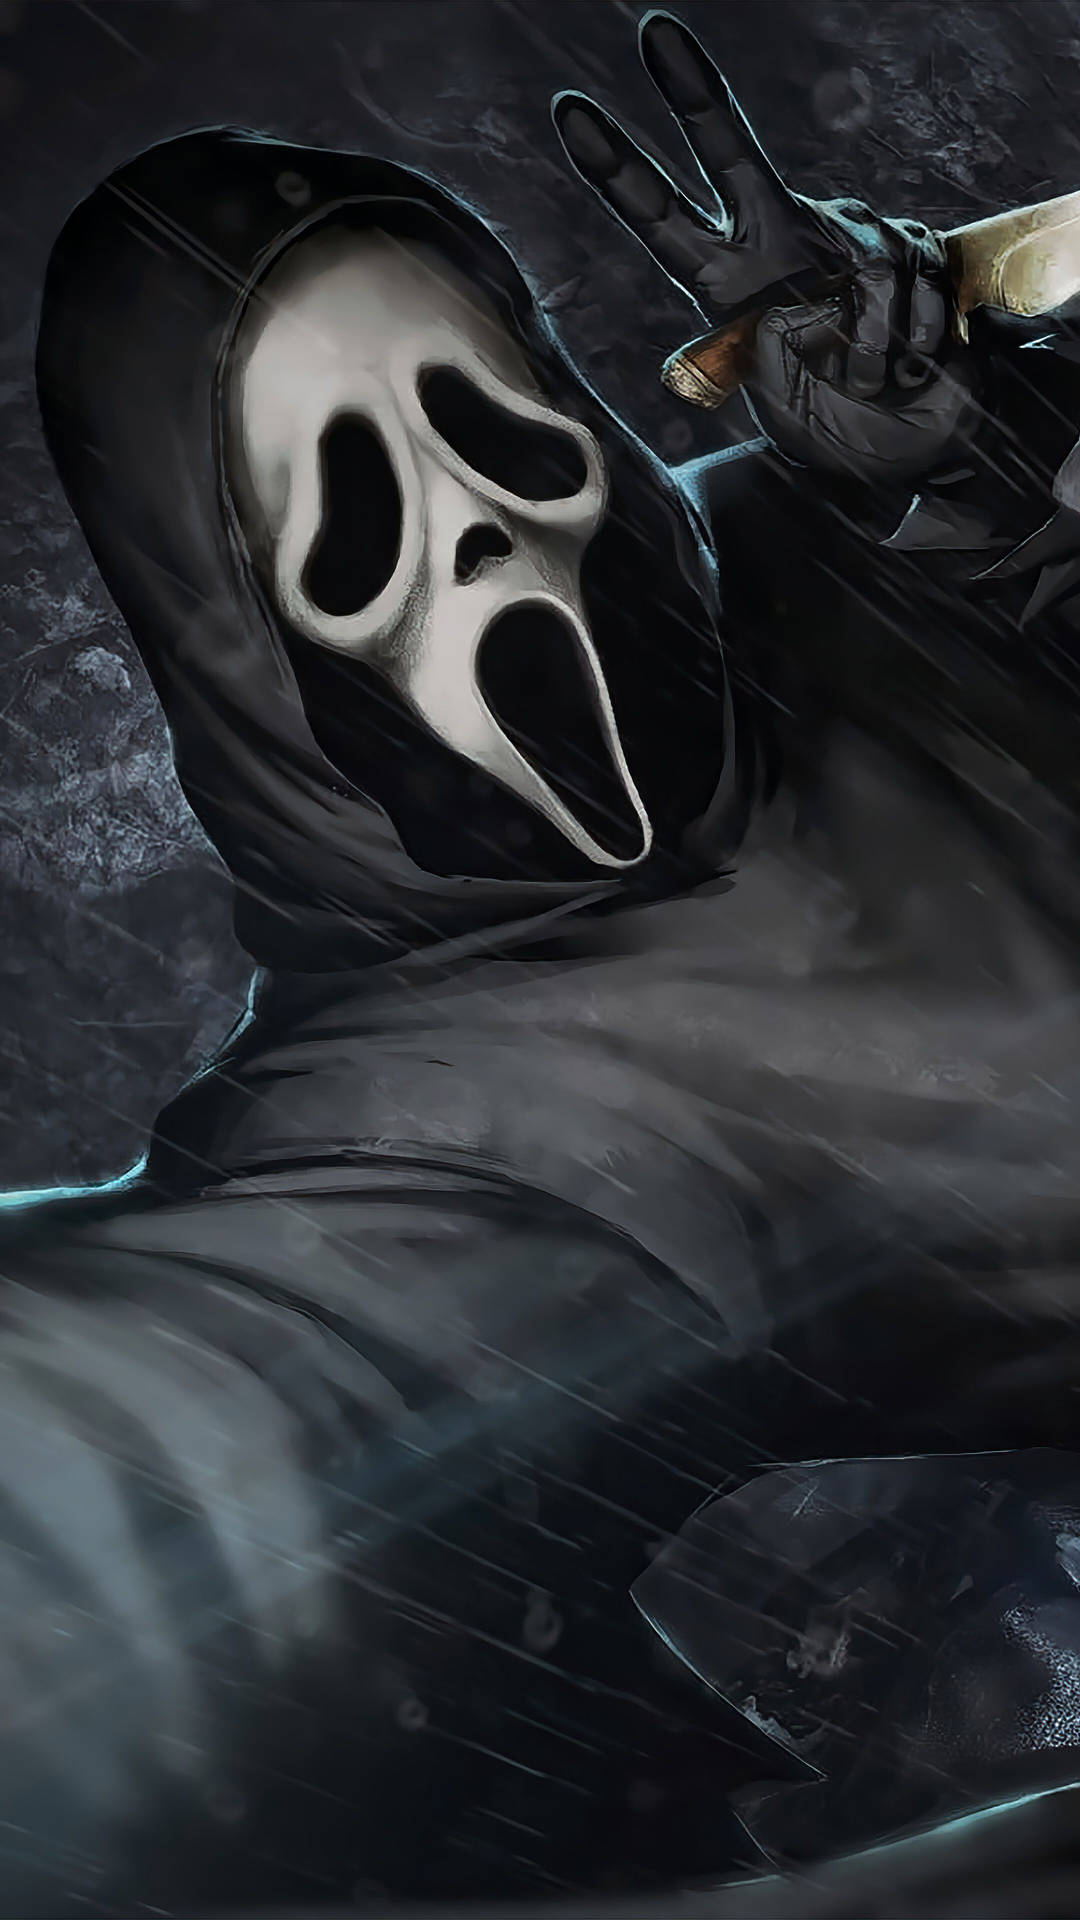 Artistic Digital Painting Of Ghostface From Scream Background